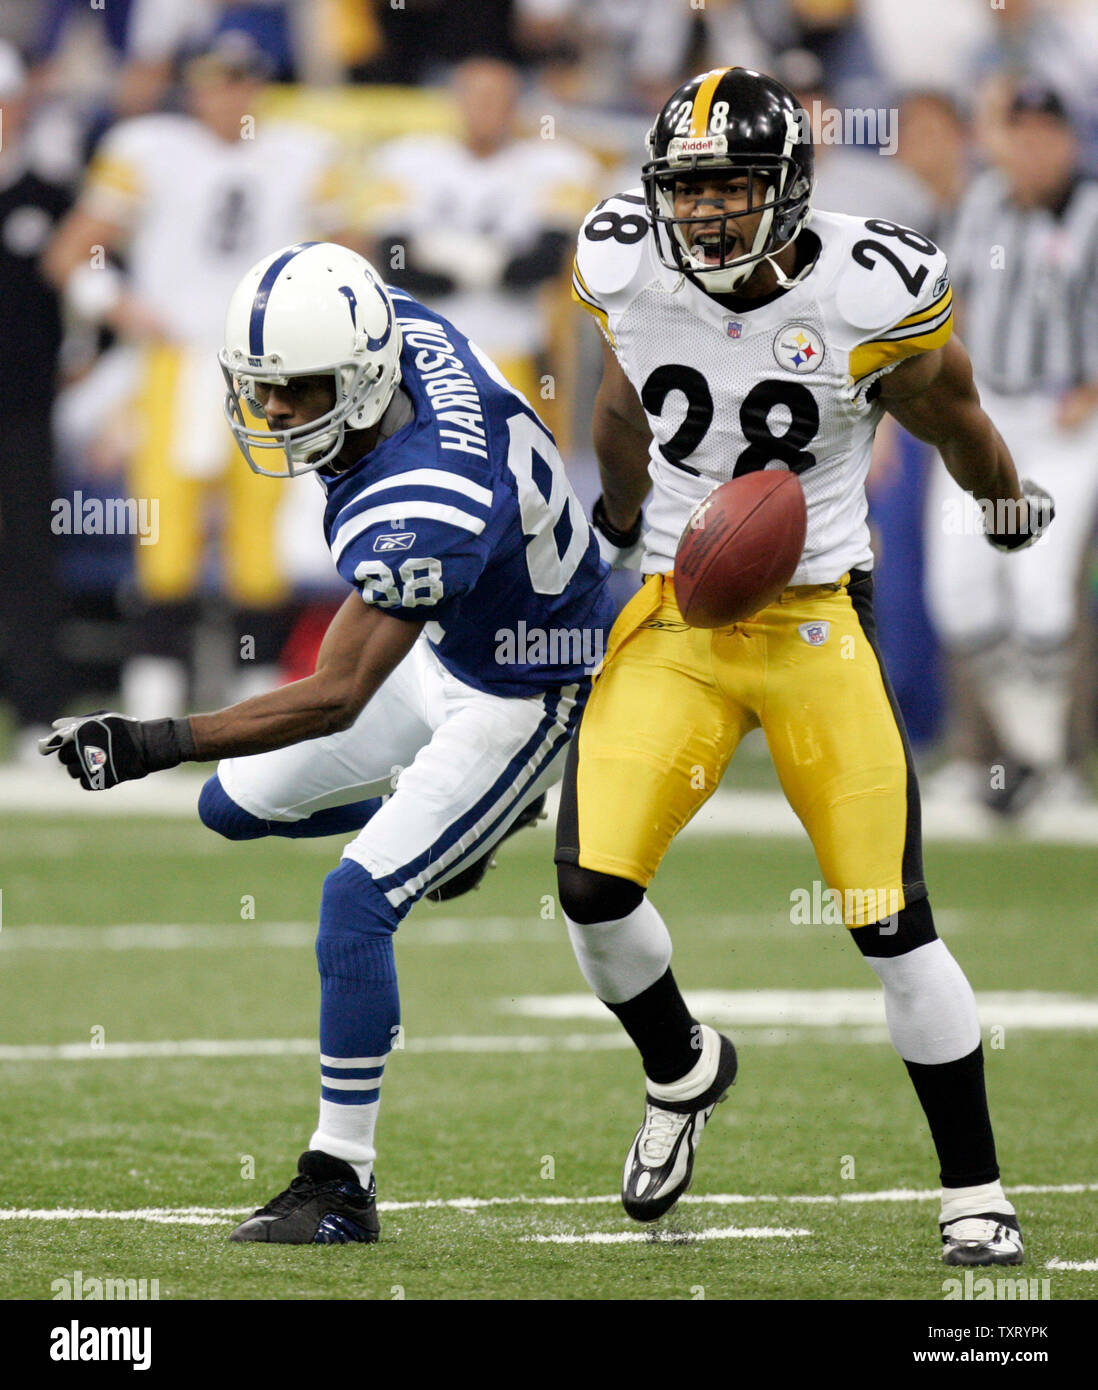 Pittsburgh Steelers safety Chris Hope (28) breaks up a pass intended for Indianapolis Colts wide receiver Marvin Harrison (88), during their AFC Divisional playoff game at the RCA Dome in Indianapolis, In January 15, 2006. (UPI Photo/Mark Cowan) Stock Photo